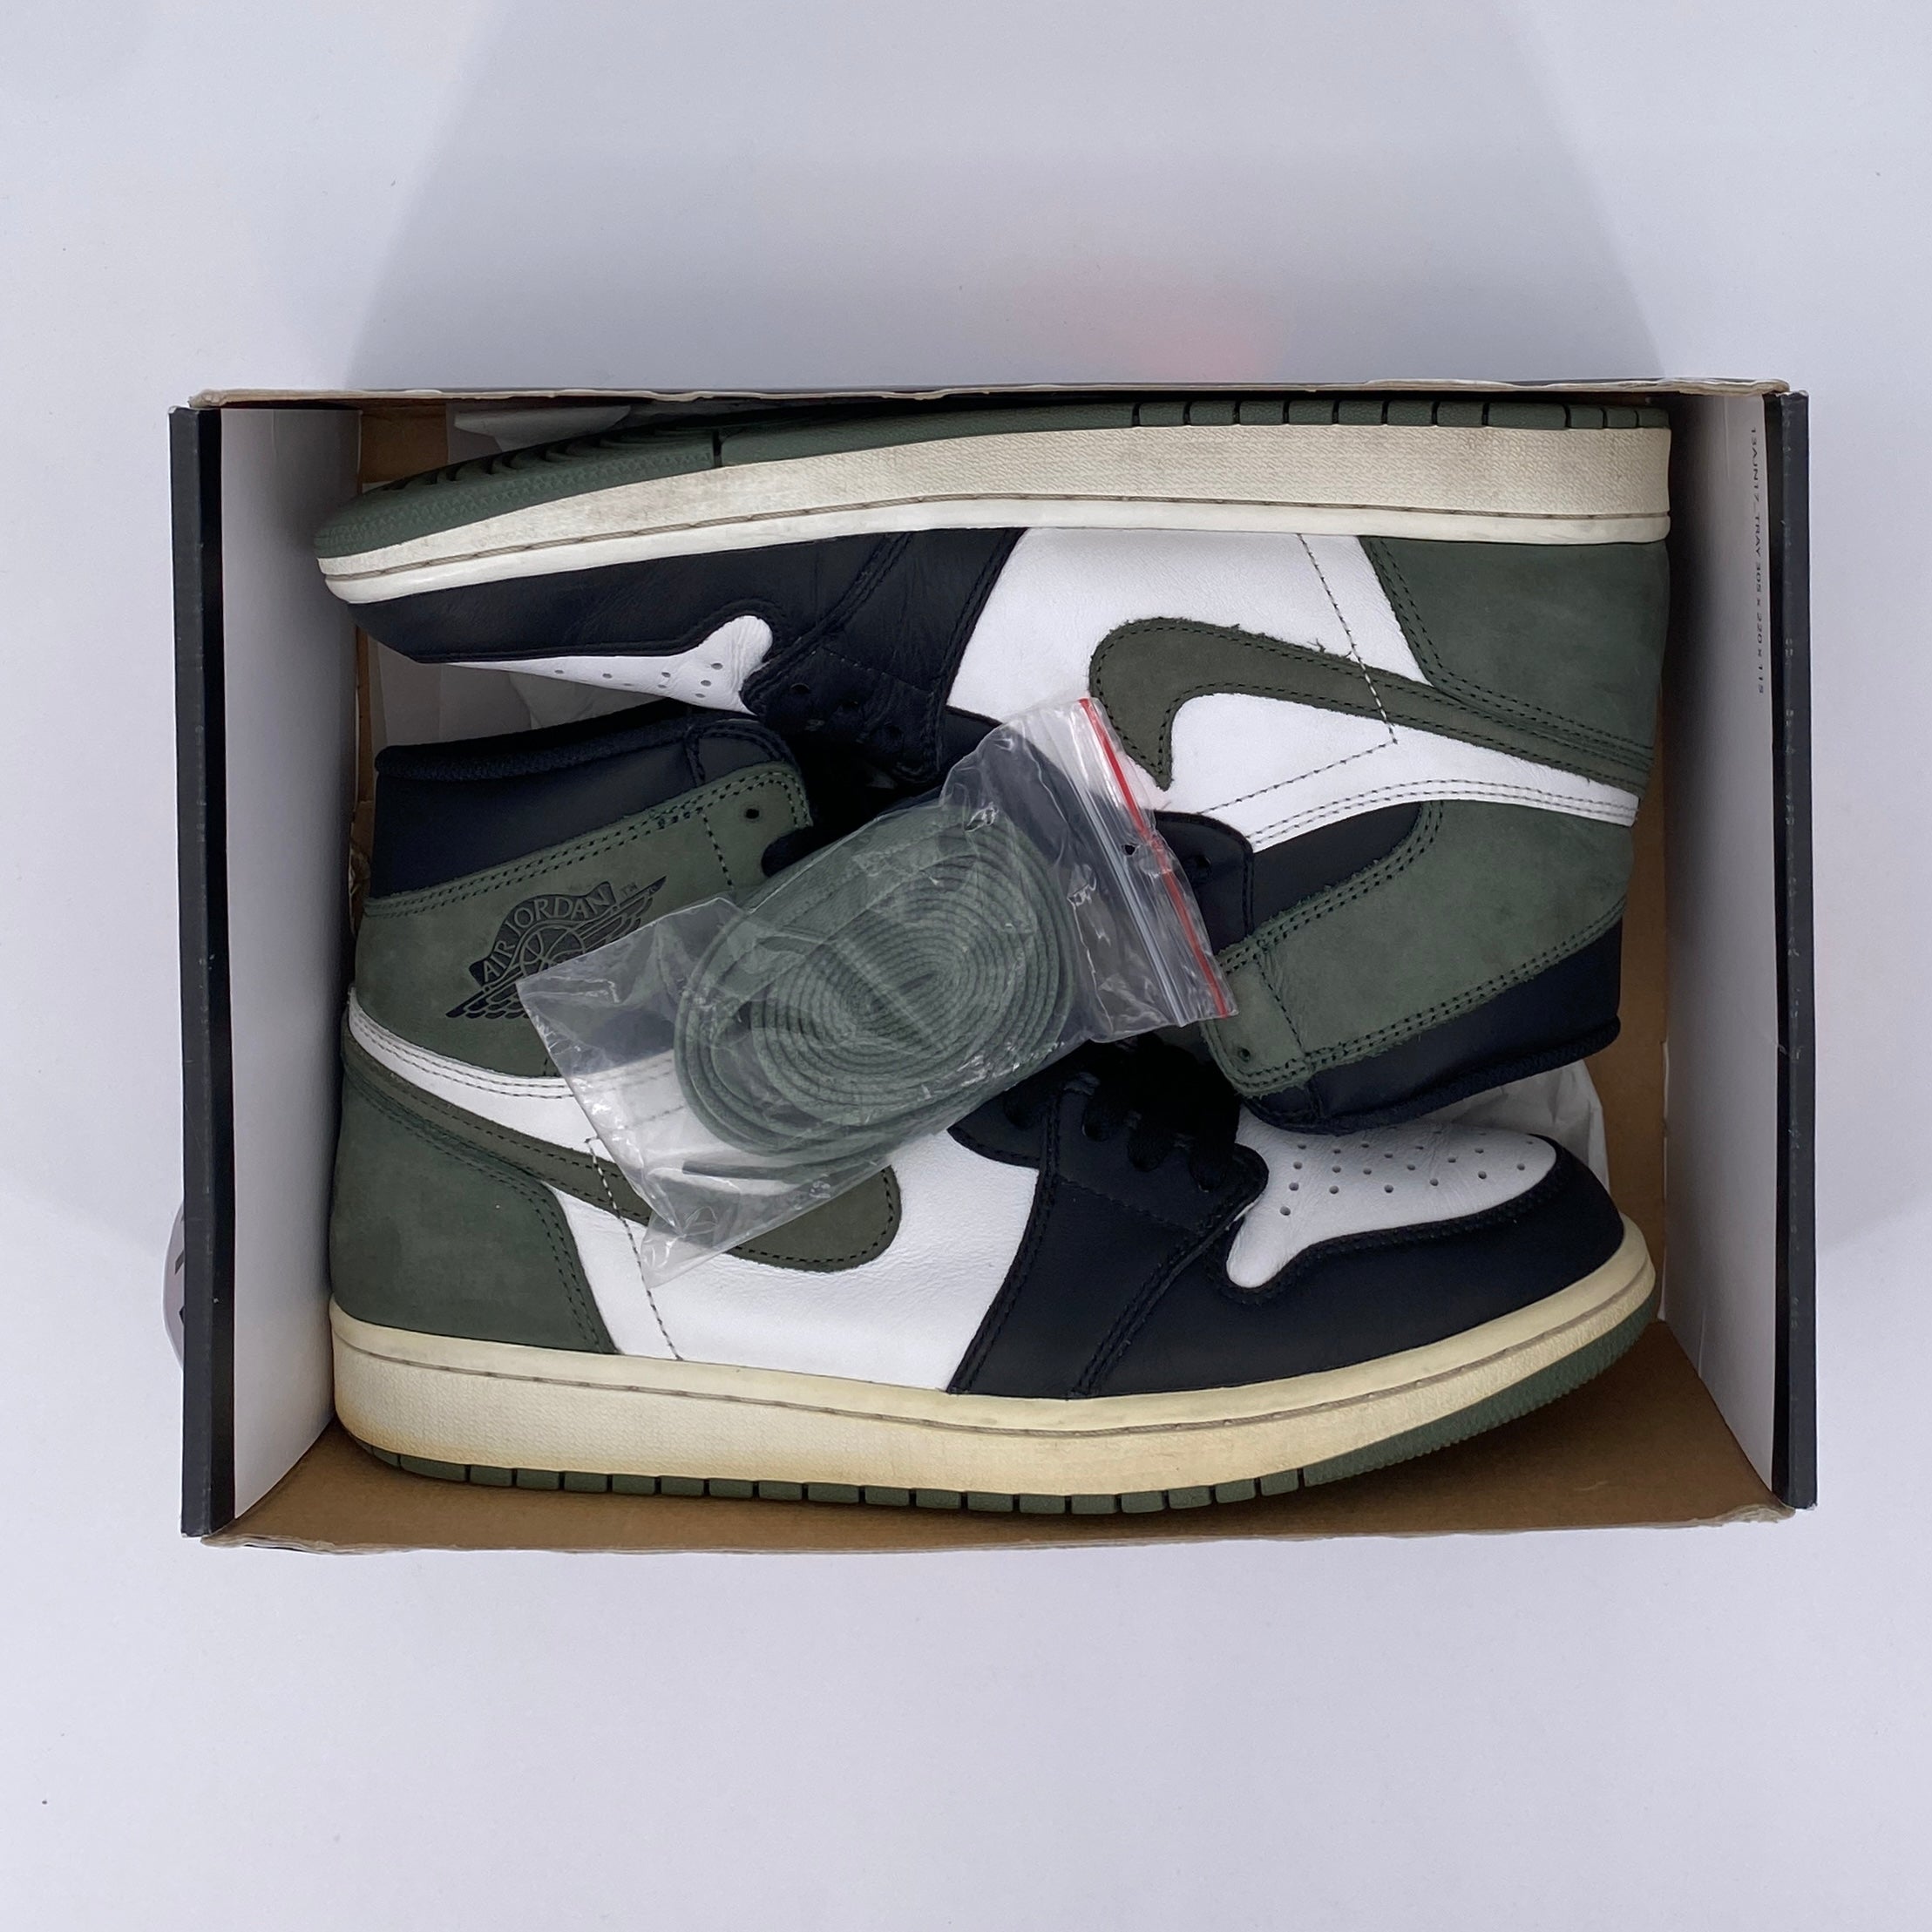 Air Jordan 1 Retro High OG &quot;Clay Green&quot; 2018 Used Size 9